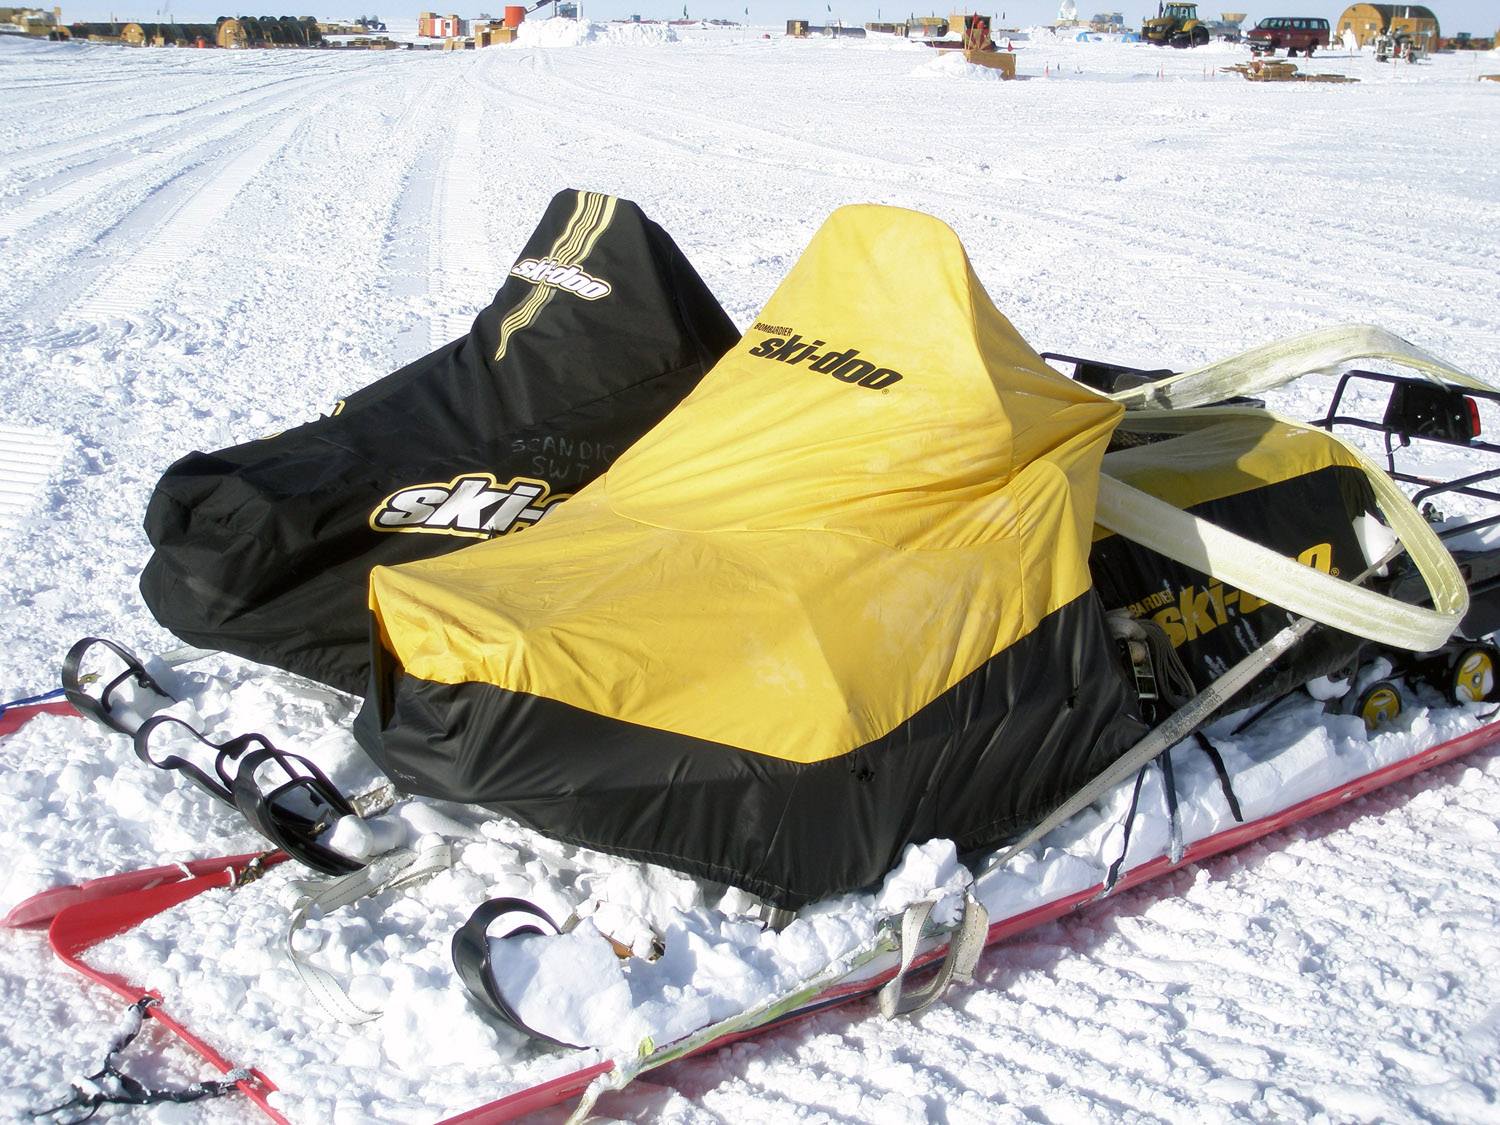 Vehicles and equipment of the South Pole Traverse - 02